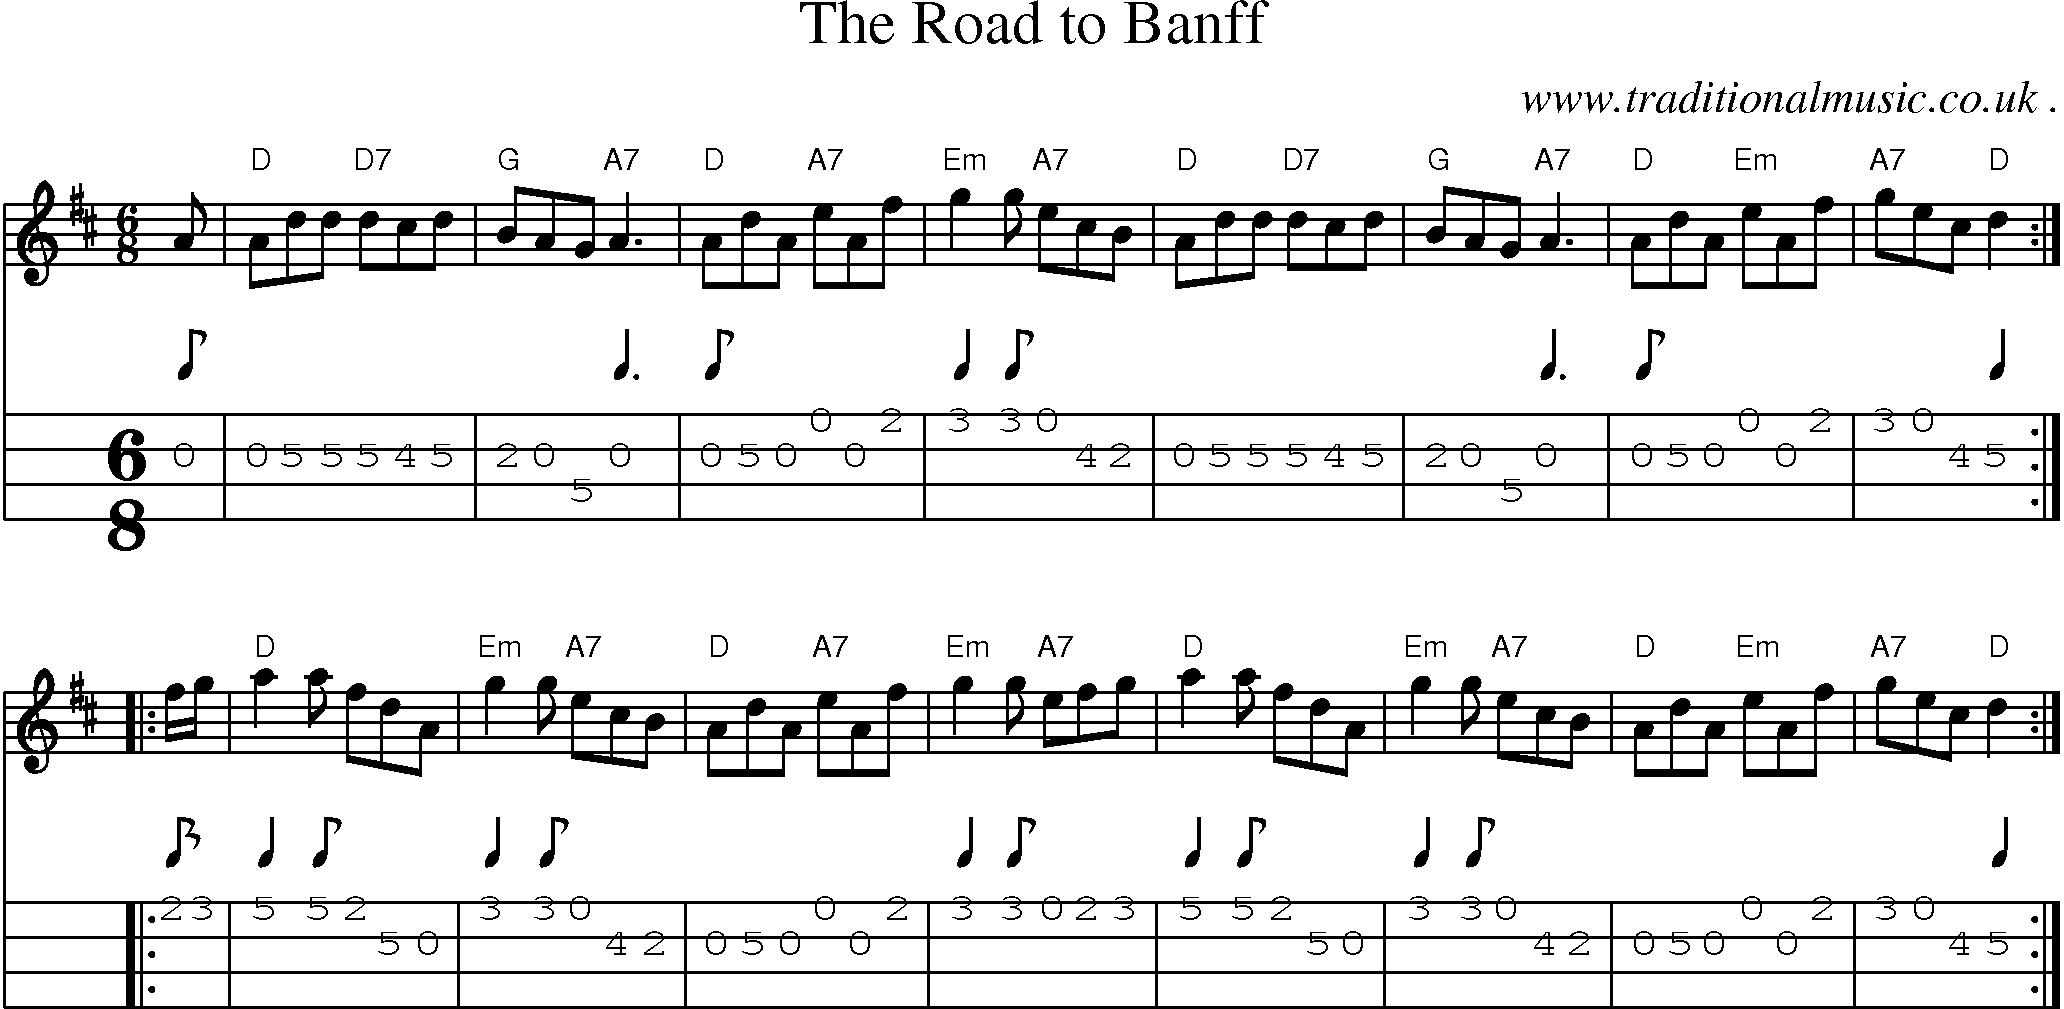 Sheet-music  score, Chords and Mandolin Tabs for The Road To Banff